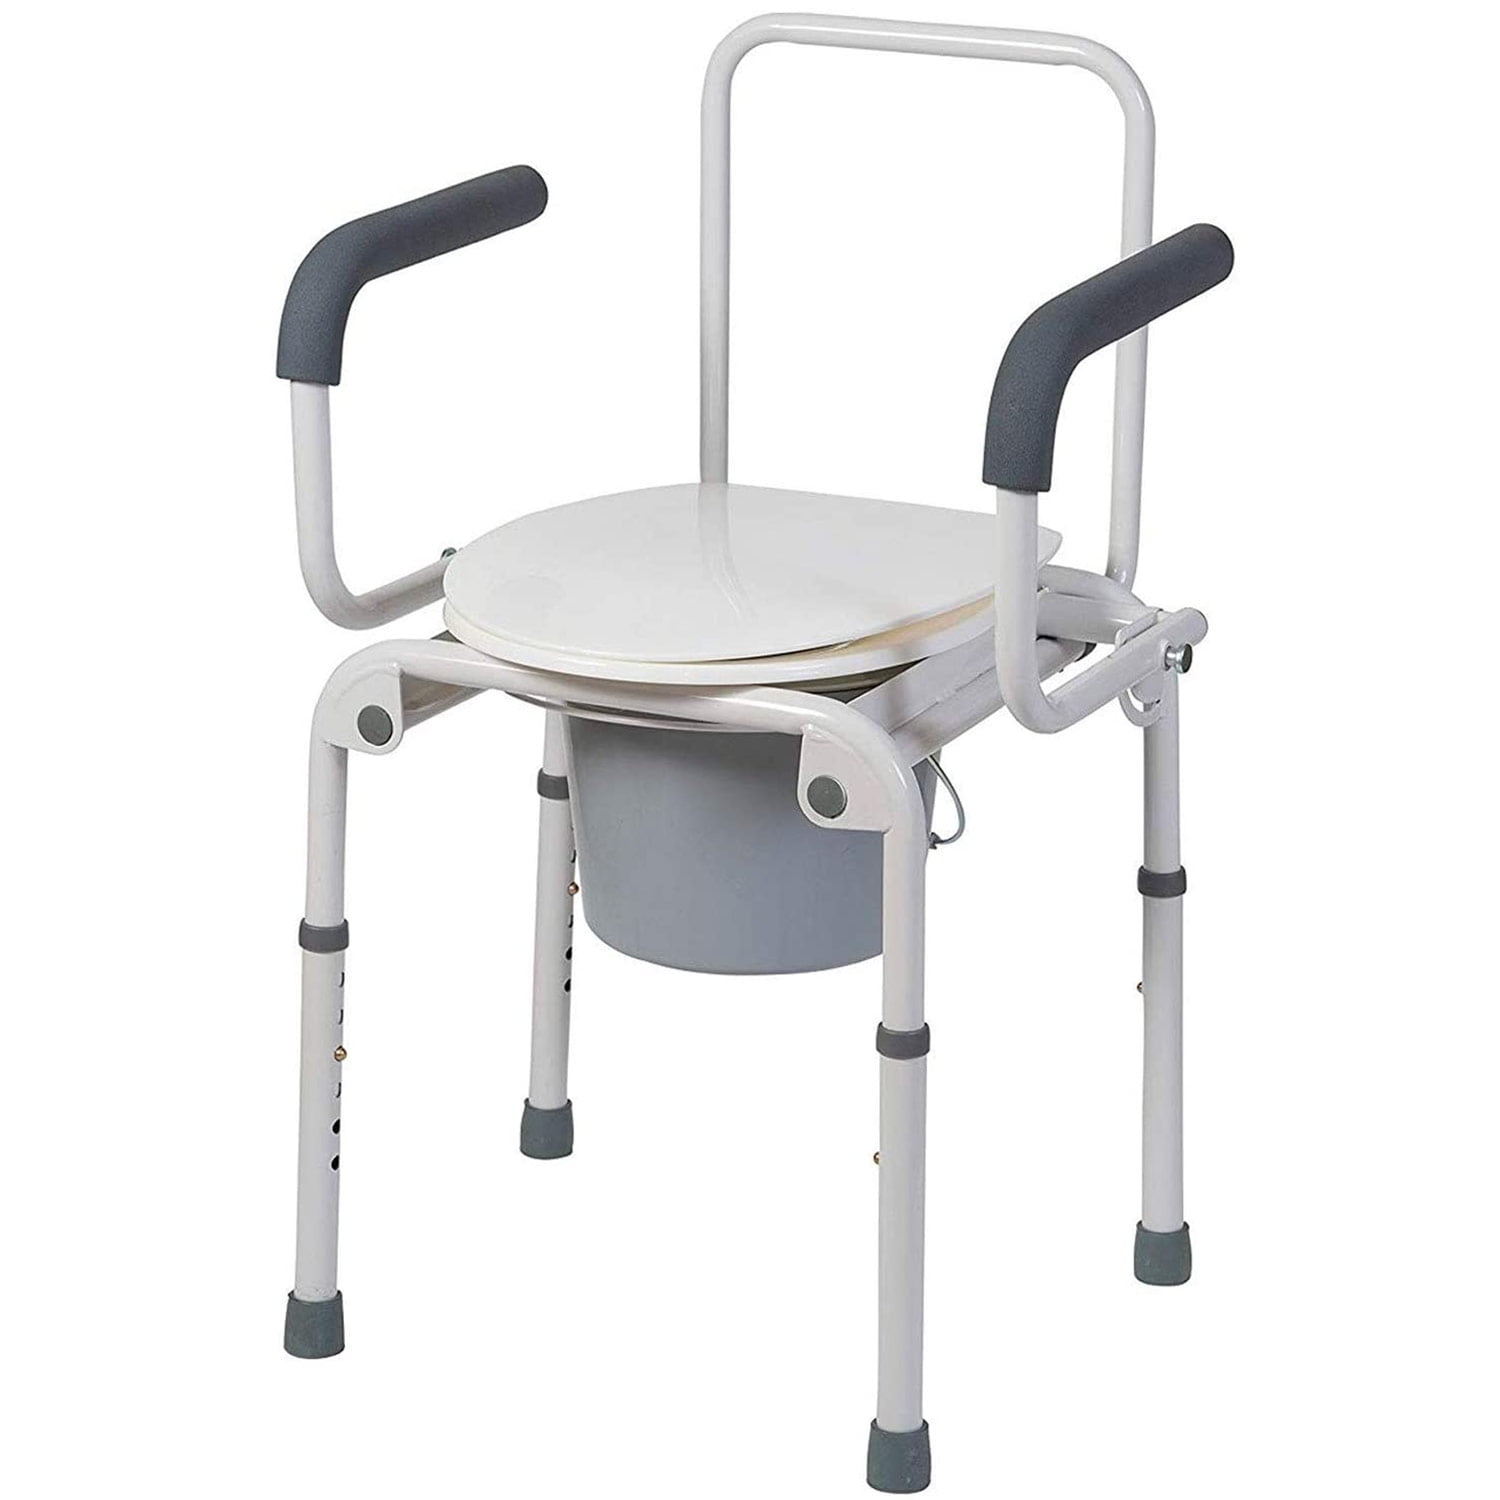 DMI Portable Toilet for Seniors and Elderly, Drop-Arm Steel Bedside  Commodes, Adult Potty Chair, Portable Bucket Toilet Seat for Handicap,  Medical Toilet Chair 